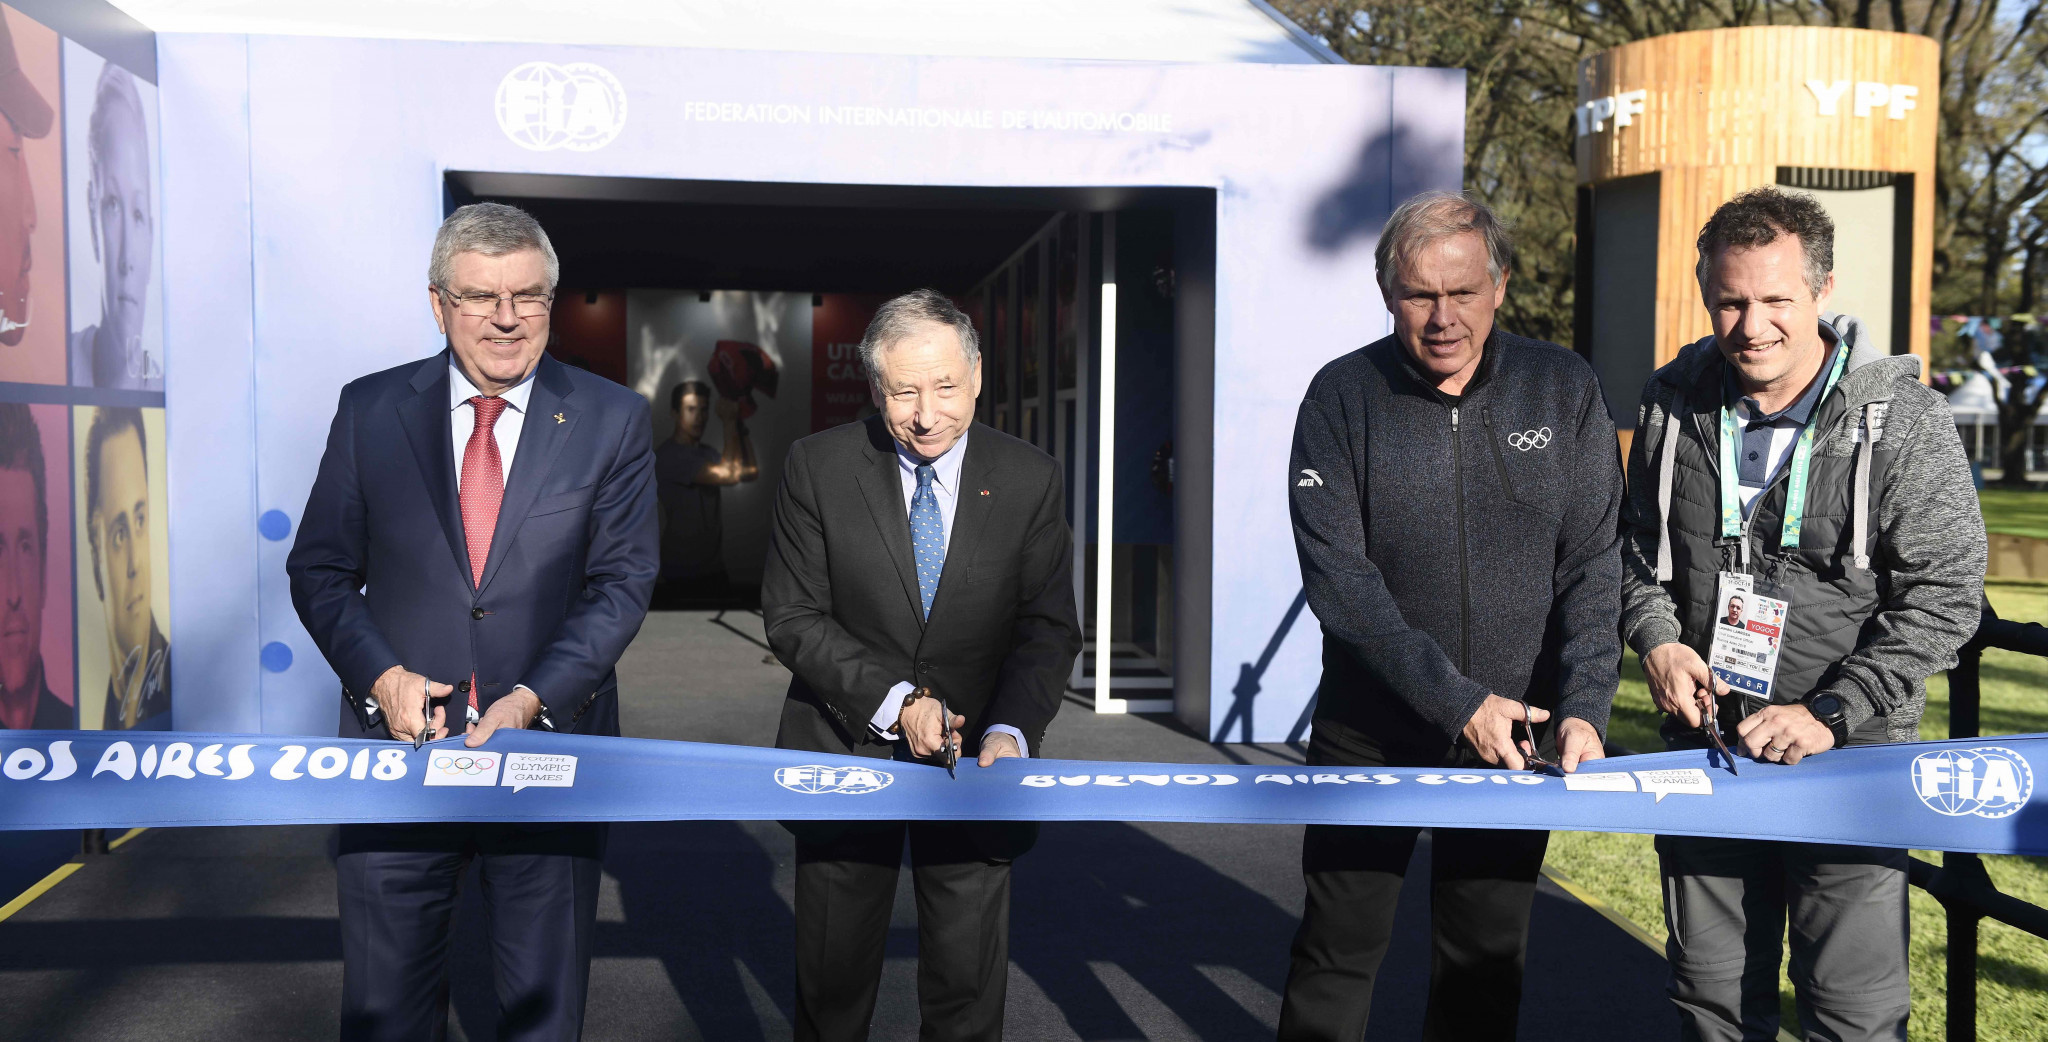 FIA Road Safety Exhibition opened by Todt and Bach at Buenos Aires 2018